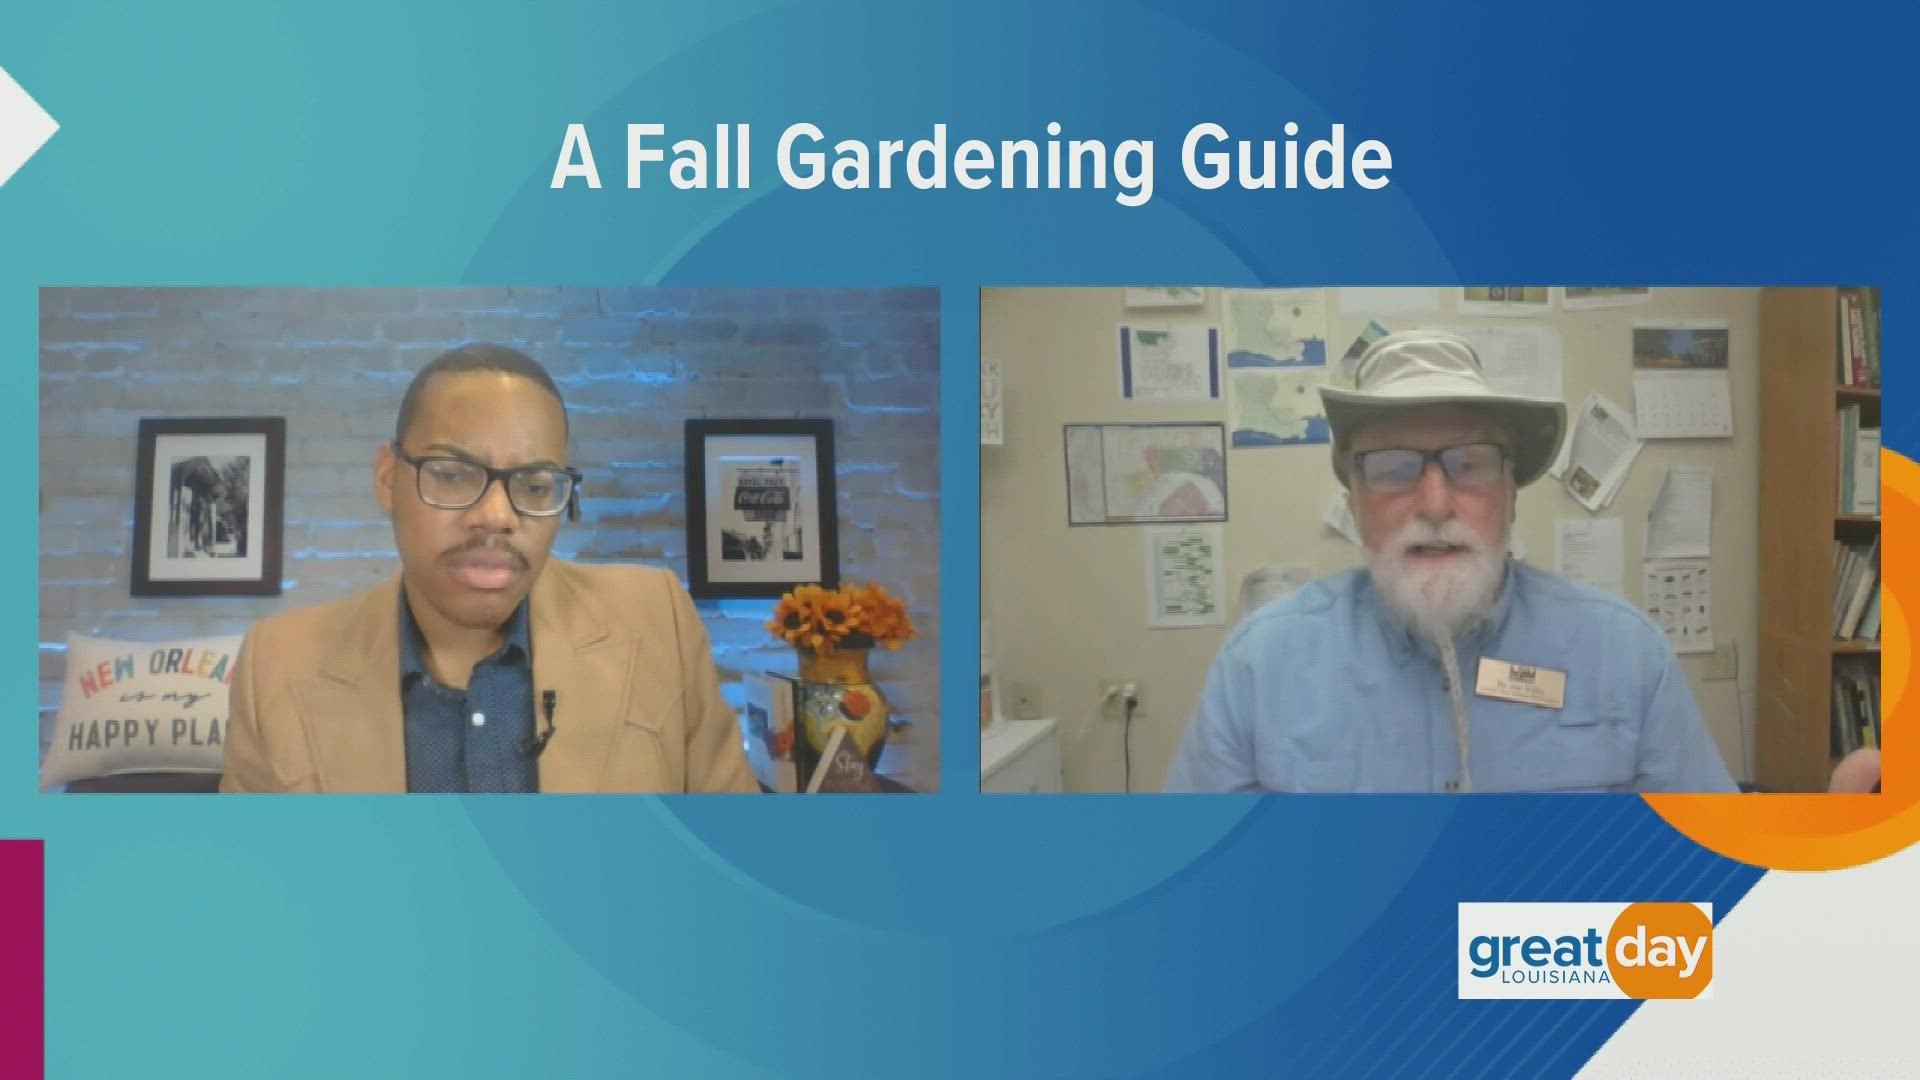 A horticulturist with the LSU Ag Center shared tips on how to prepare your garden for the fall season.